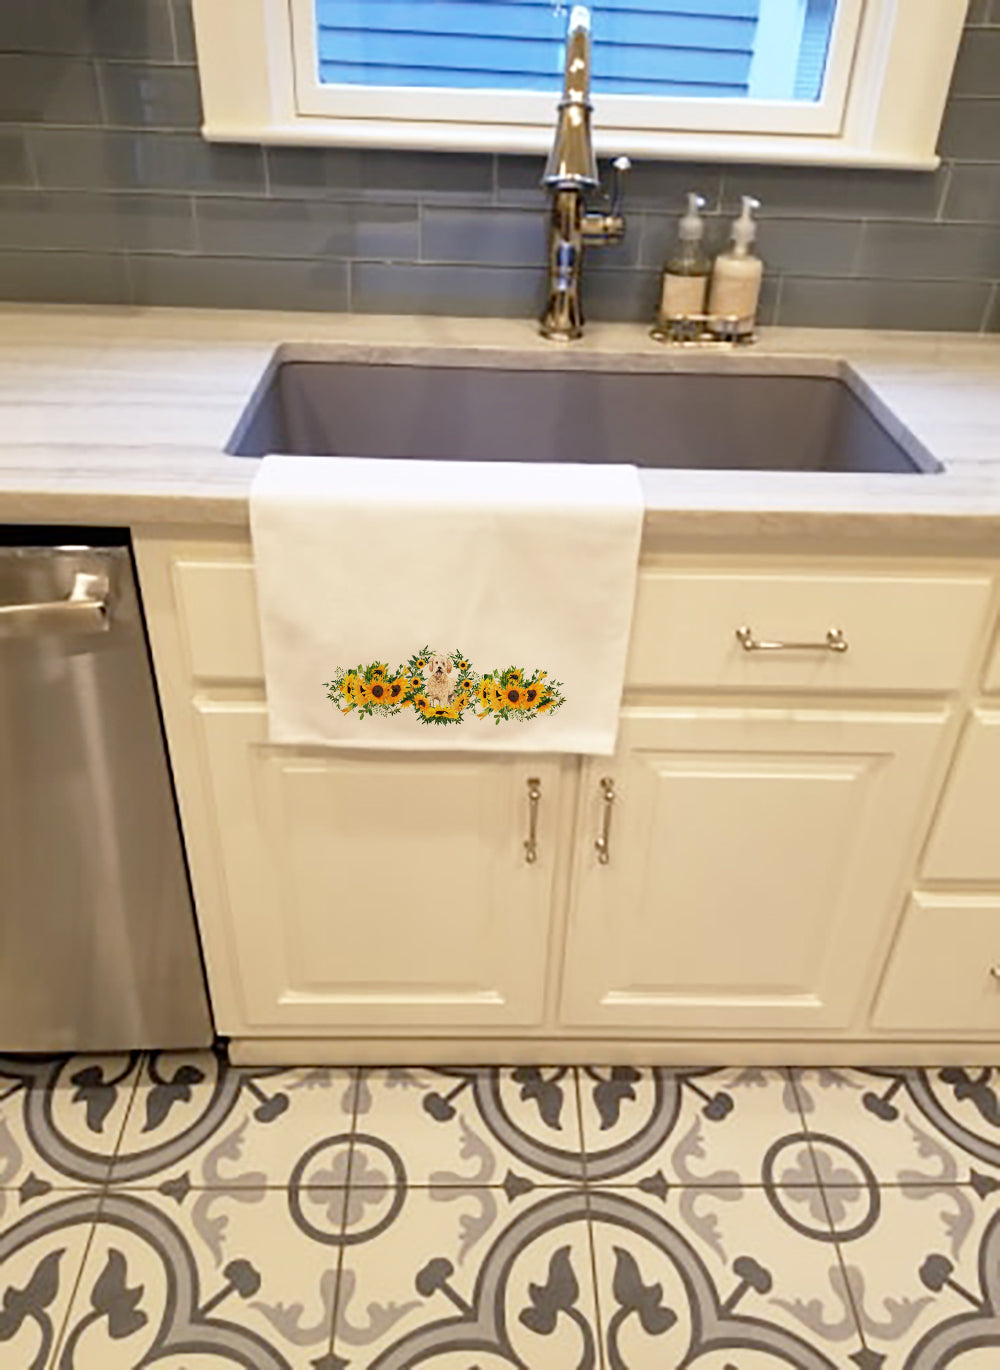 Buy this Goldendoodle in Sunflowers White Kitchen Towel Set of 2